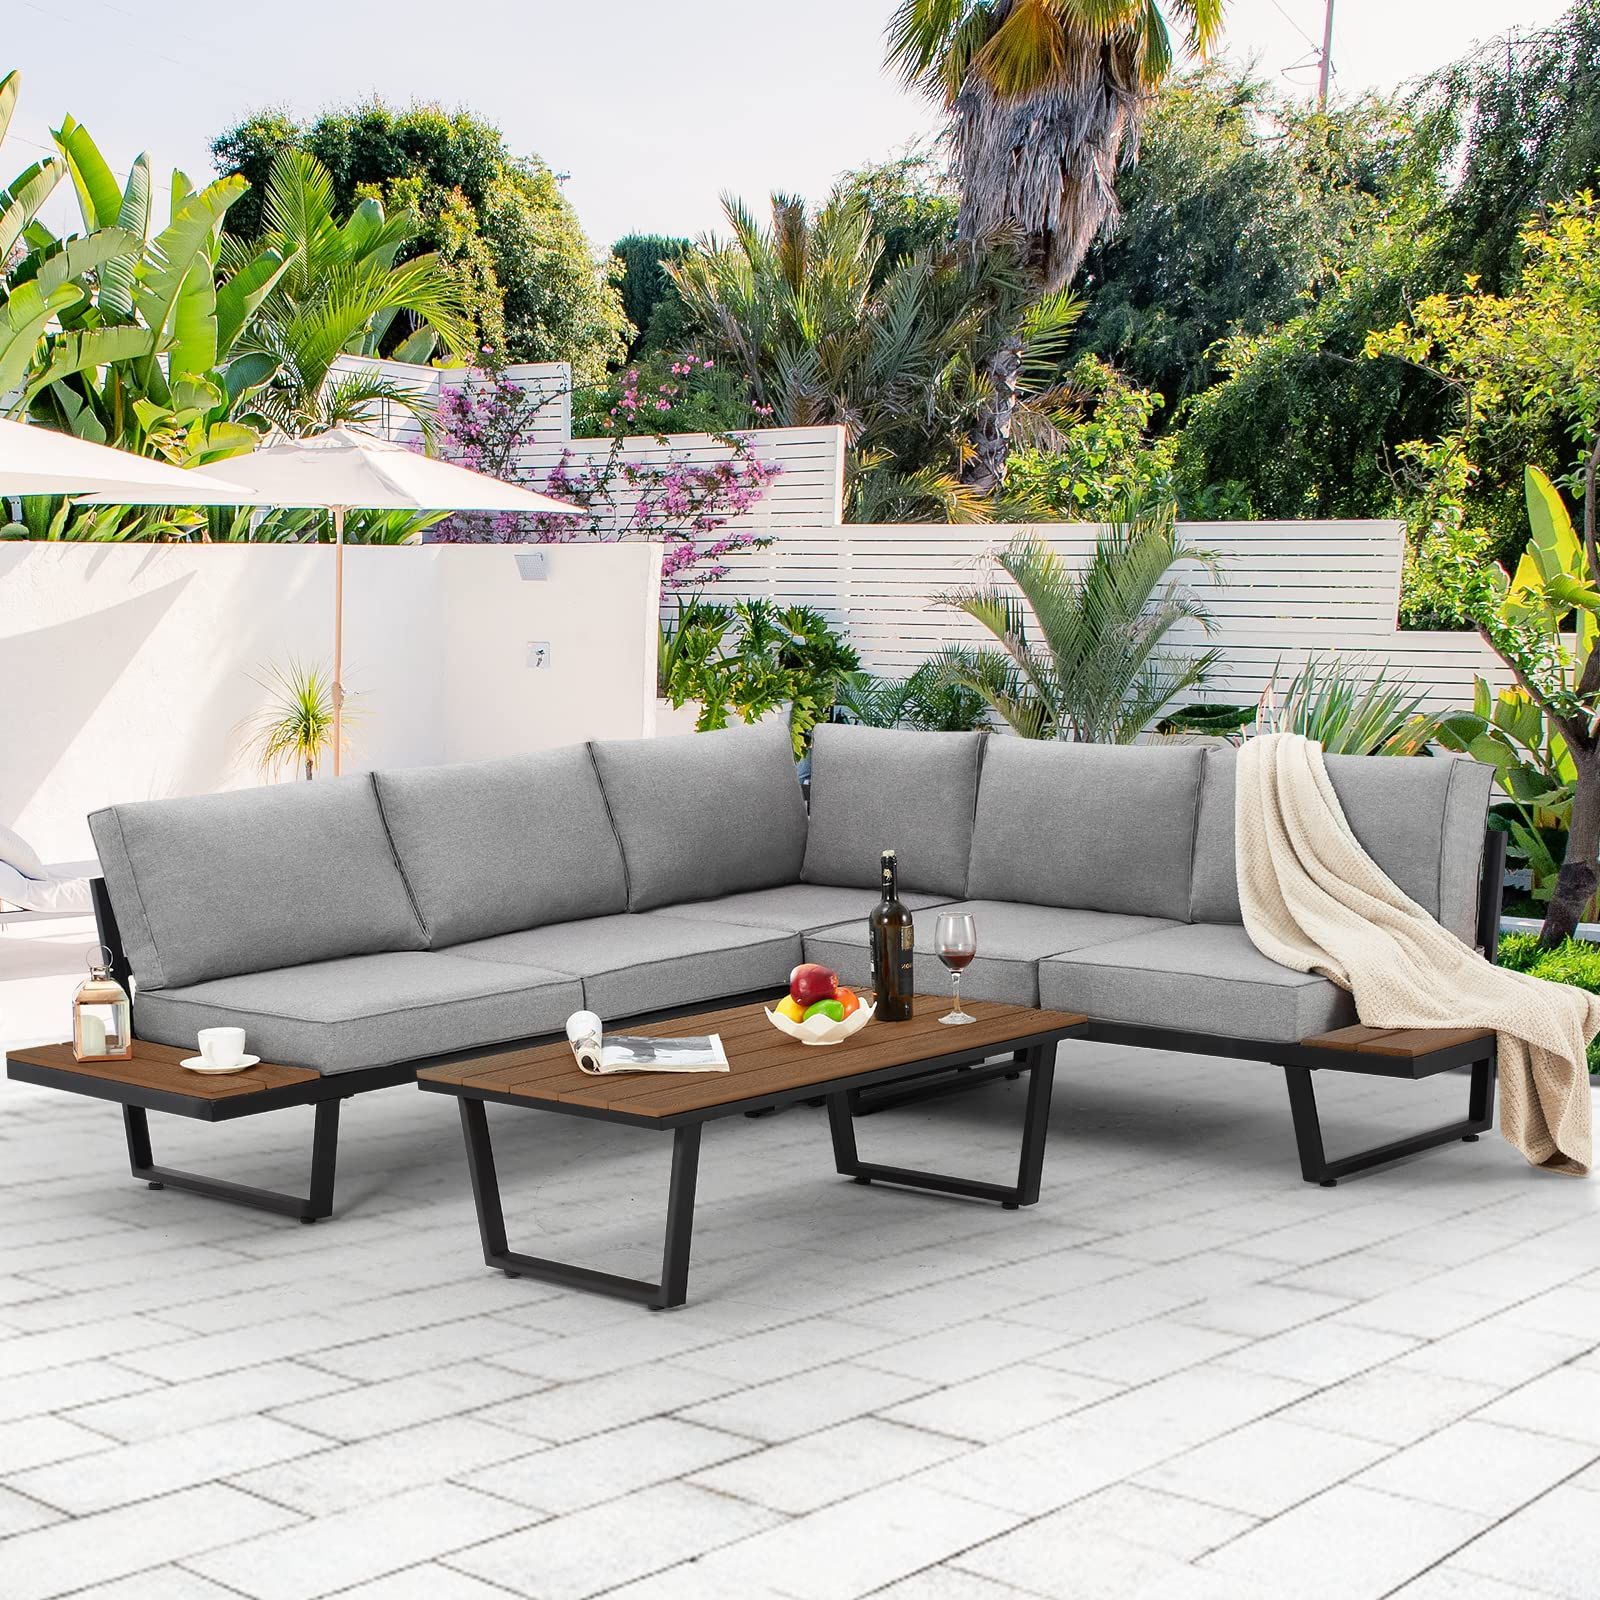 Most Current Side Table Iron Frame Patio Furniture Set Within Amazon: Erommy 4 Pieces Outdoor Sectional Sofa Set With Coffee Table,  91''×91'' Extra Large L Shaped Metal Conversation Set With All Weather Gray  Cushion And Built In Side Table For Patio, Backyard, Garden : Patio, (Photo 7 of 15)